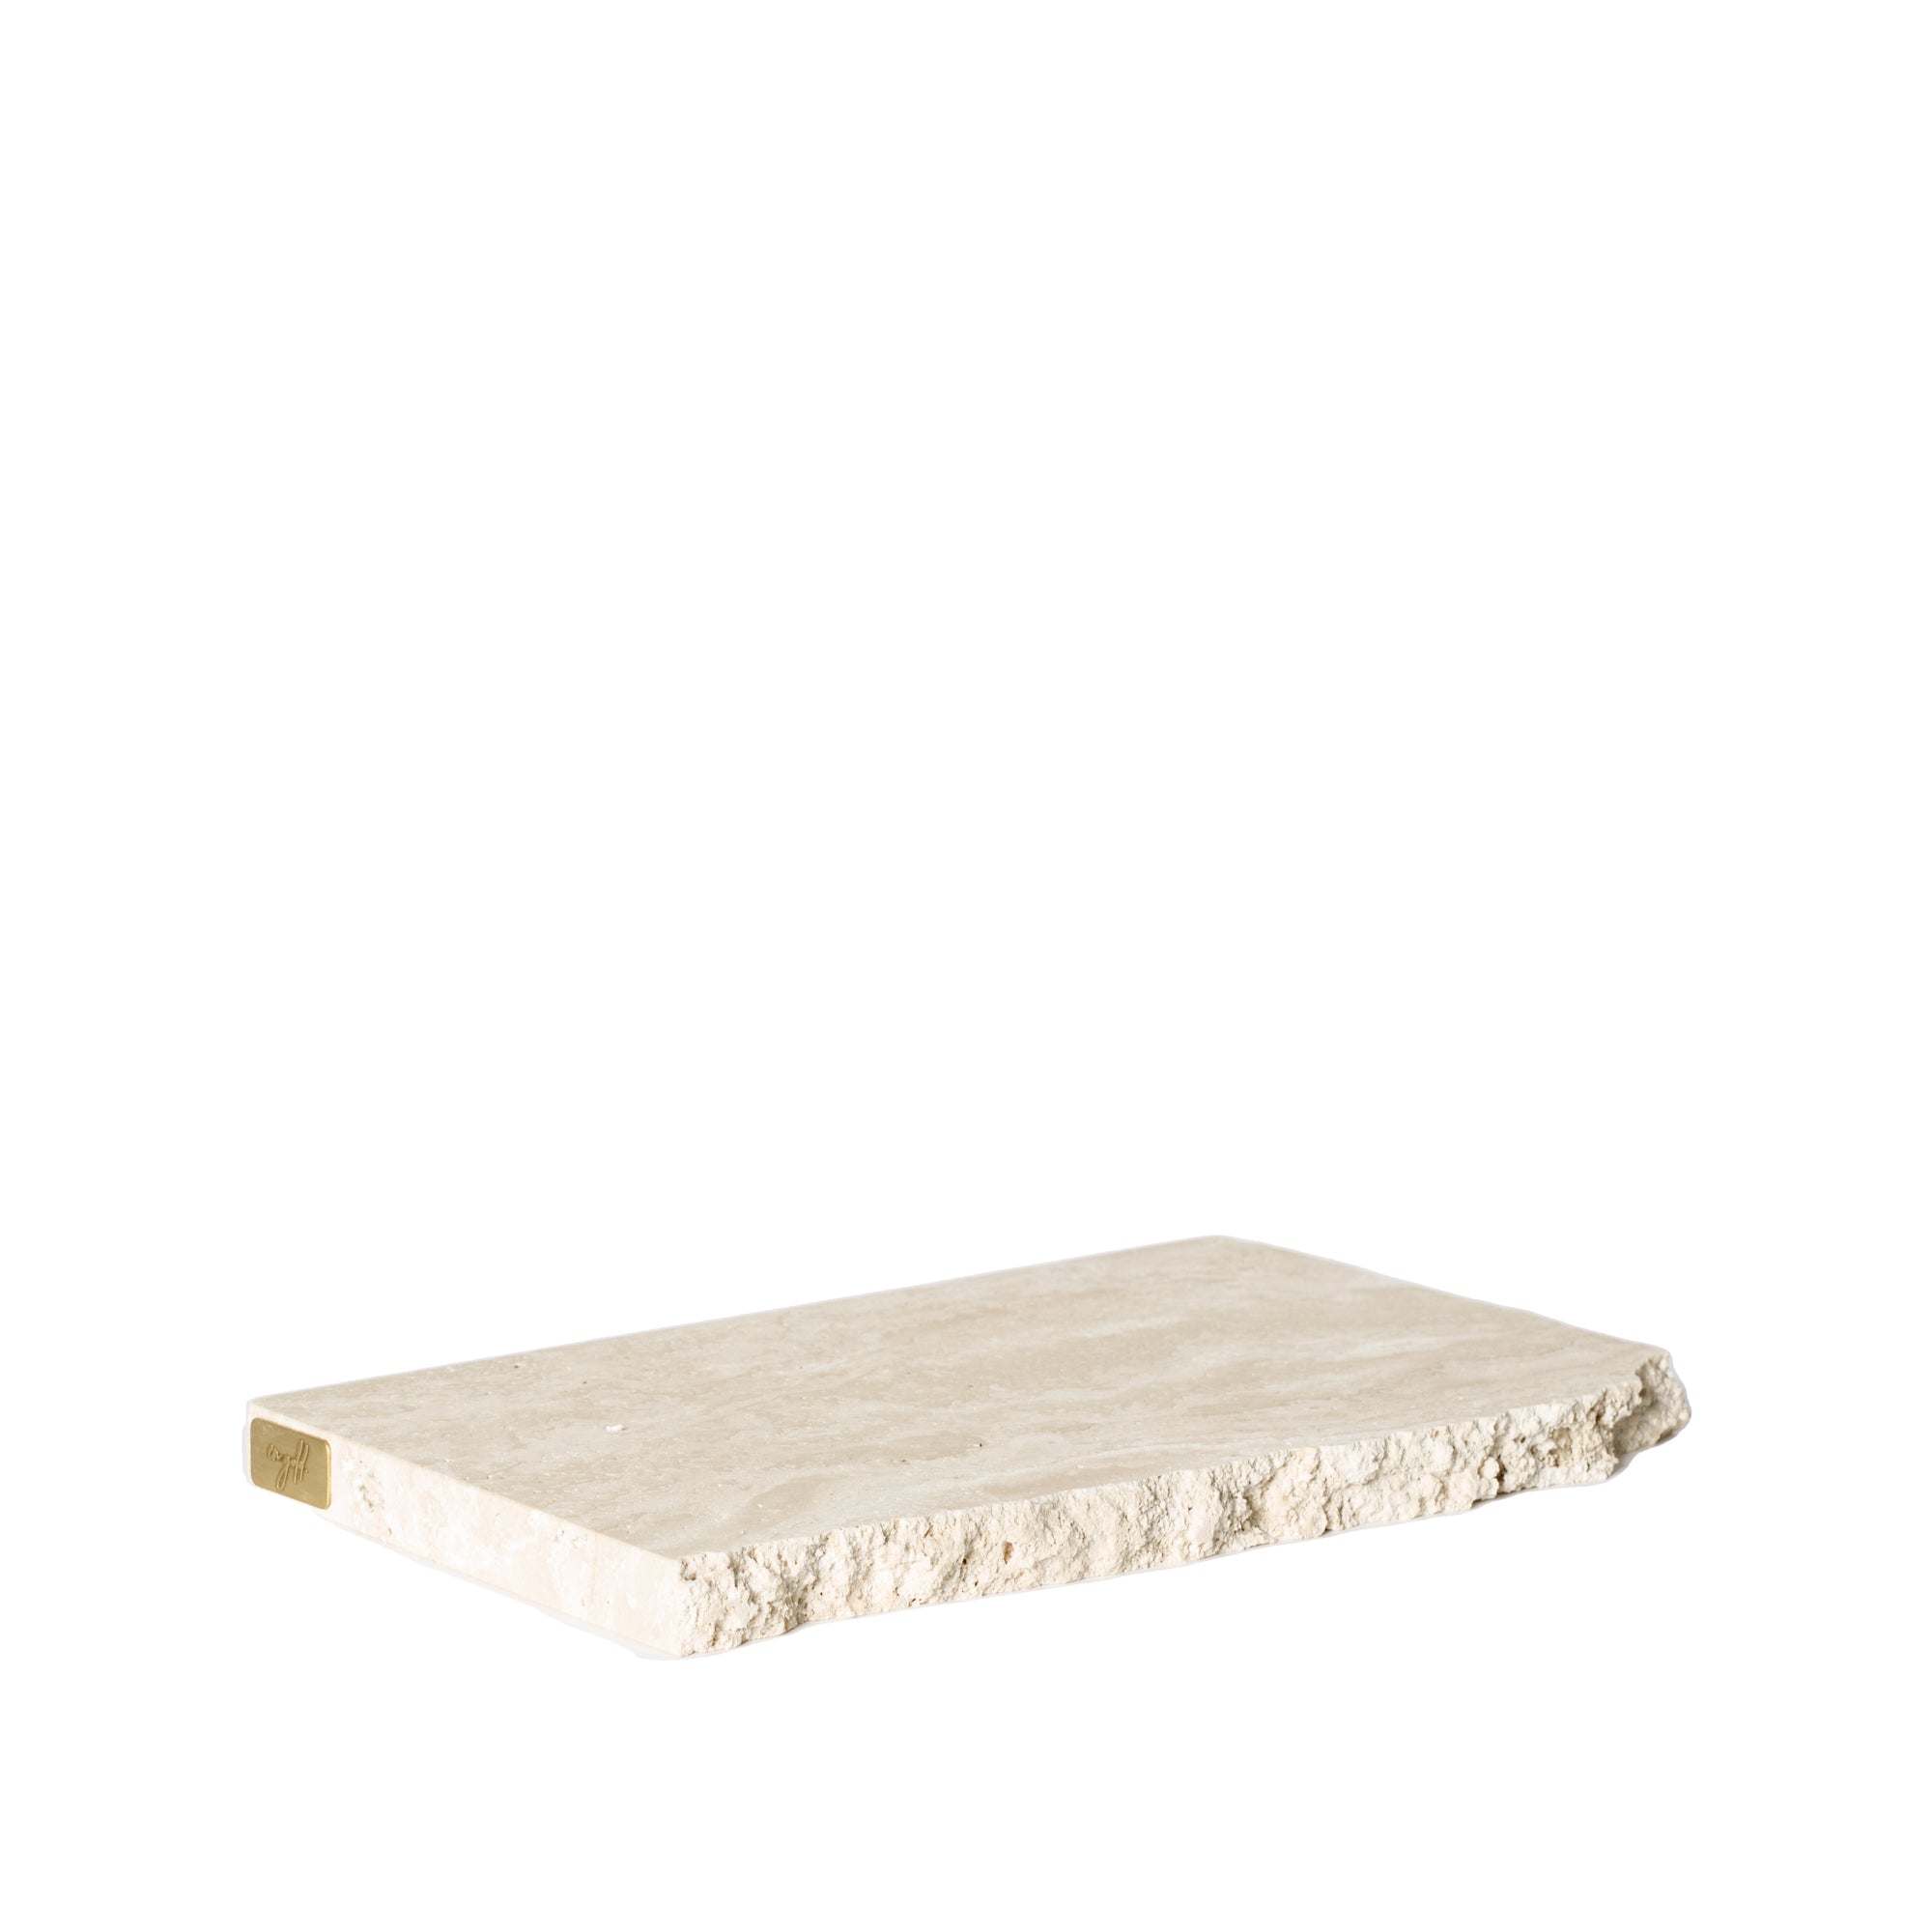 Travertine Cake Stand Slab for Hire - For Love & Living Gold Coast 